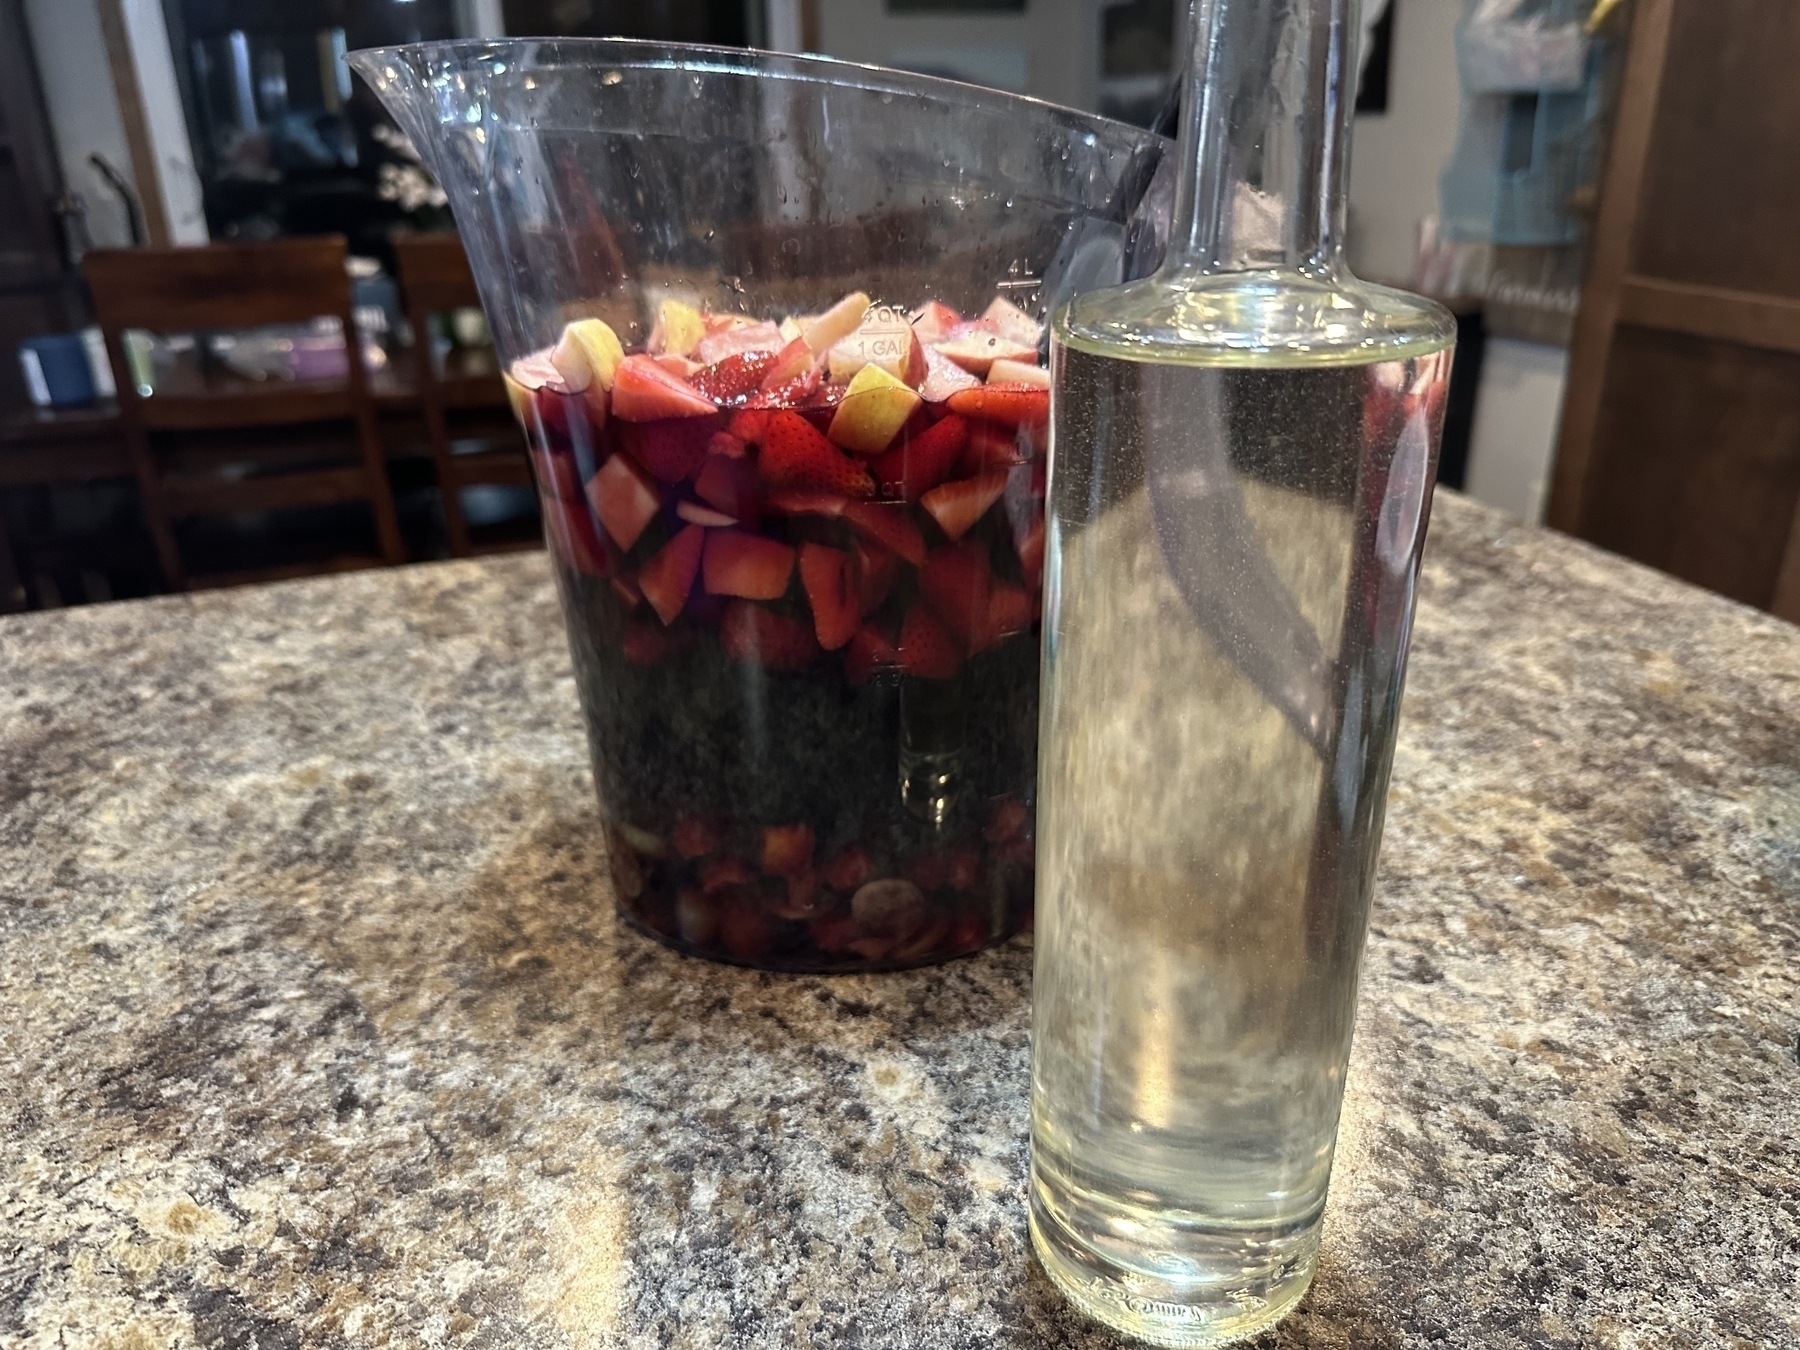 A glass pitcher containing chopped fruits and liquid sits on a marbled countertop next to a clear glass bottle filled with a pale yellow liquid in a kitchen setting.